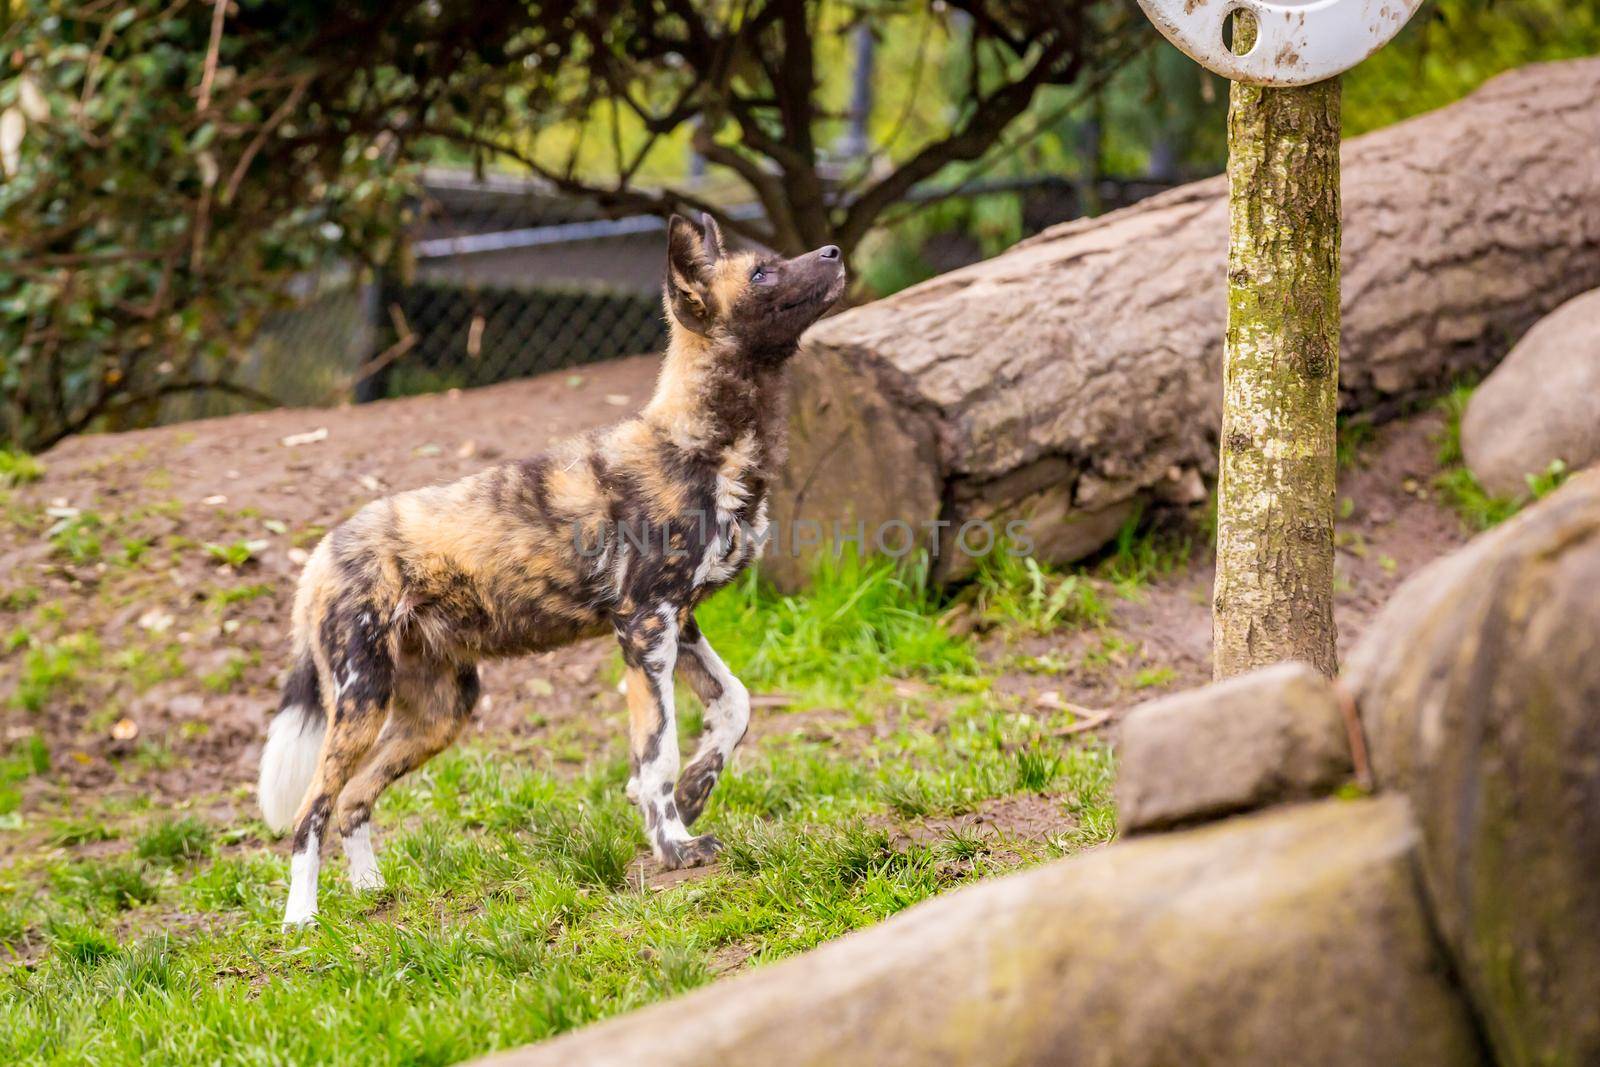 African painted dog in Oregon zoo by gepeng